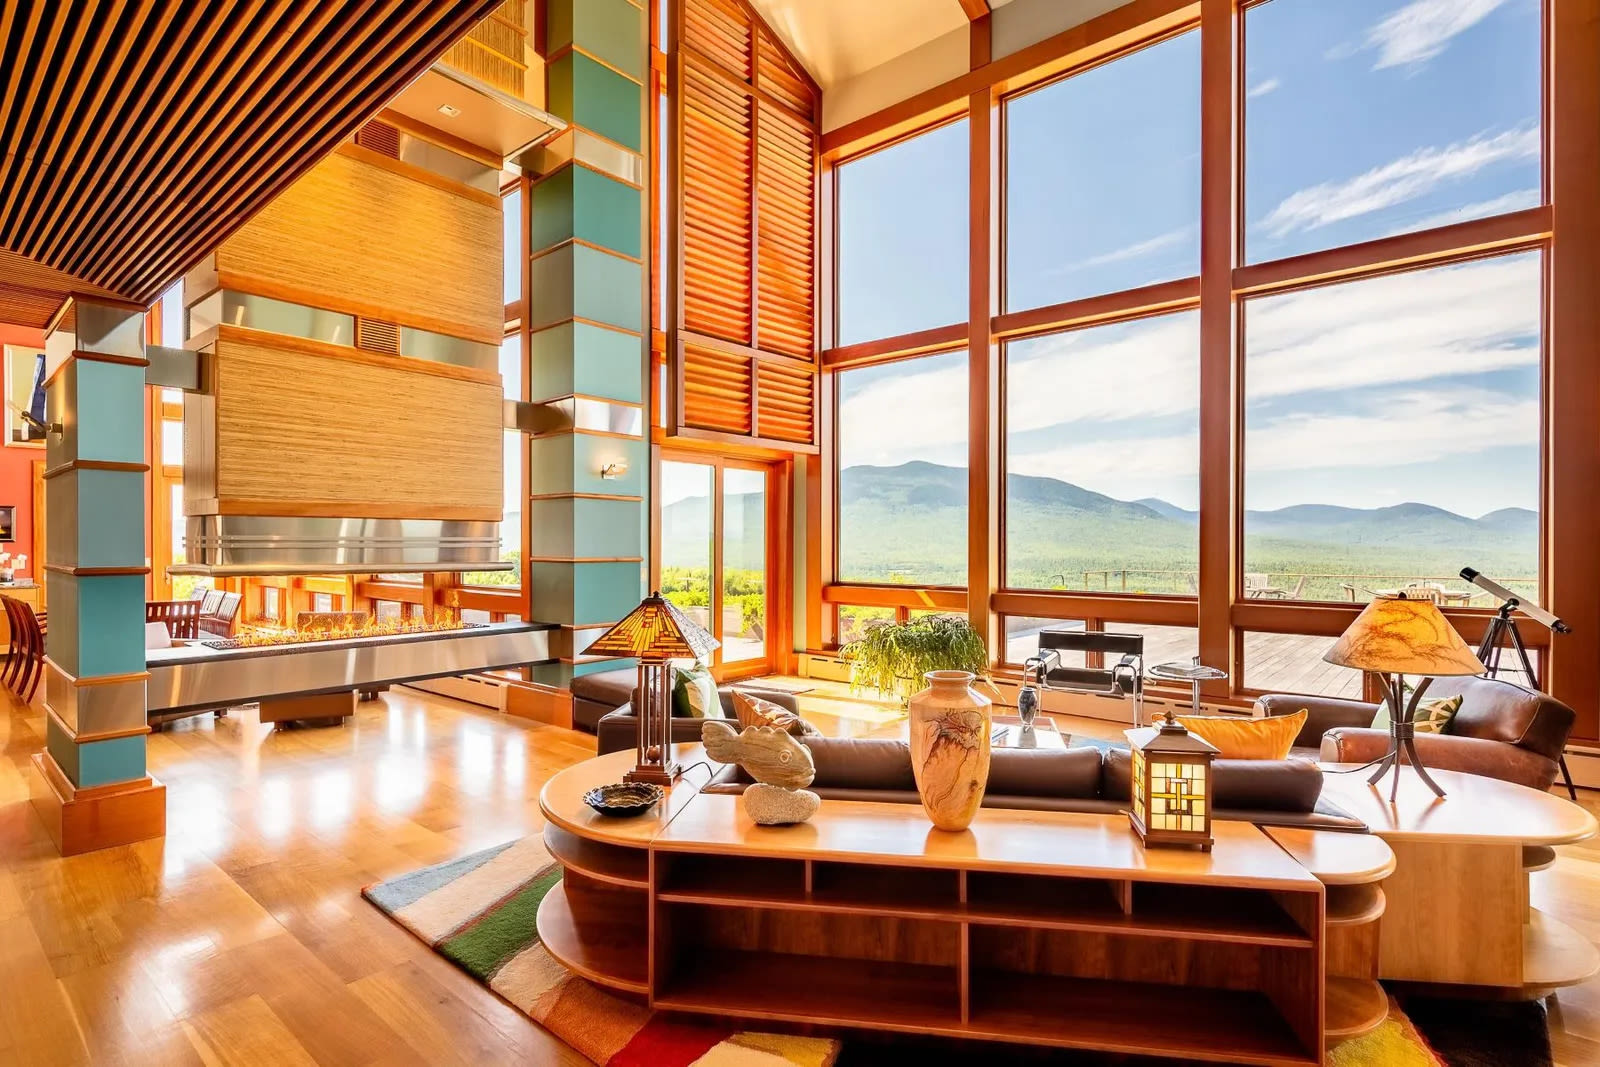 This $5M rural Maine mansion is an homage to Frank Lloyd Wright